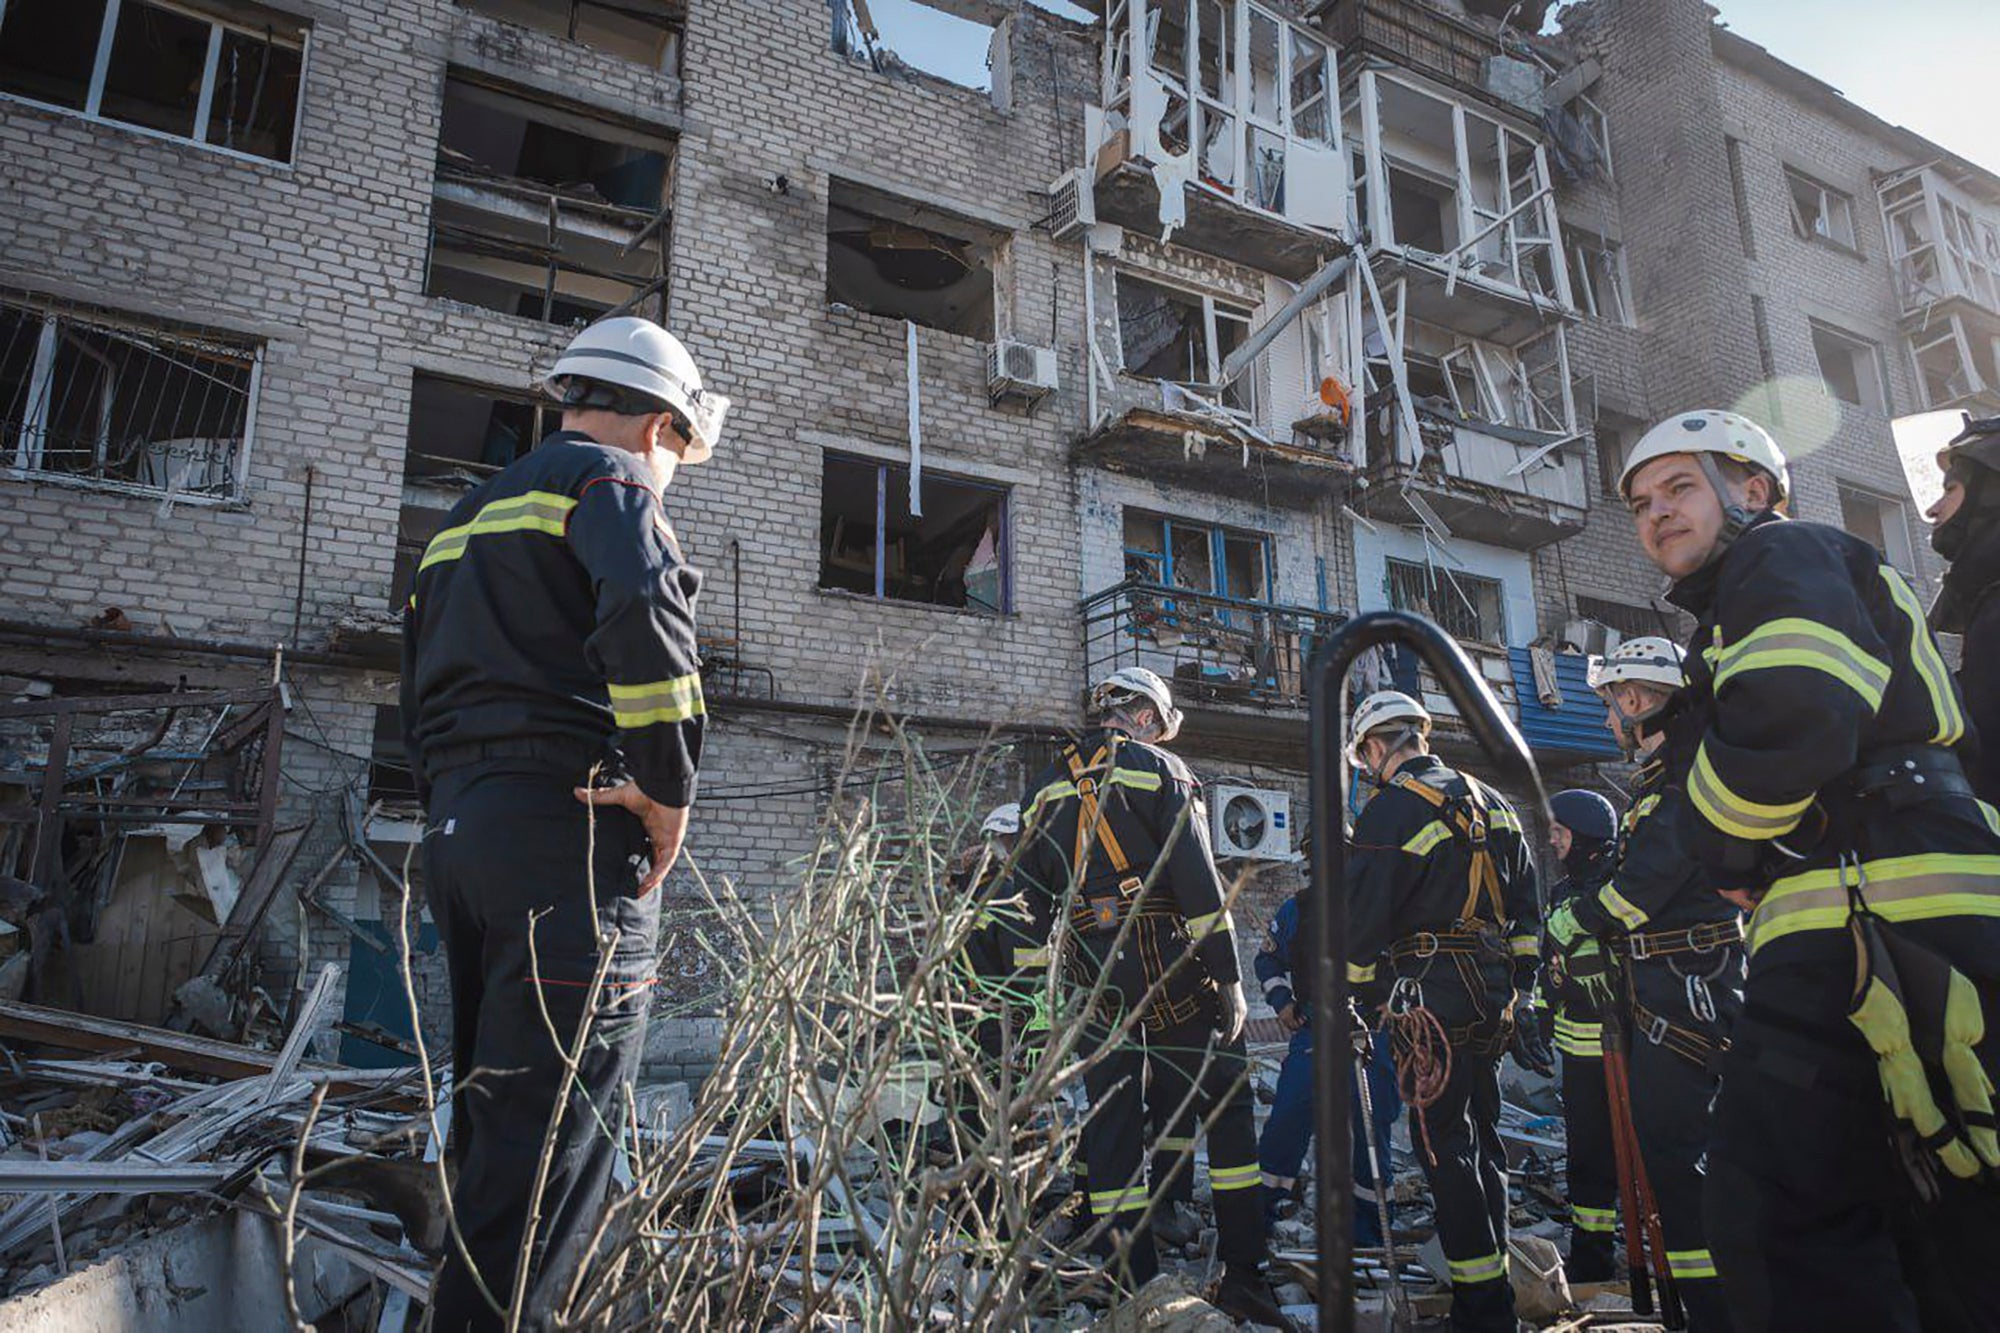 Rescue workers on the scene of a building damaged after Russian missile strikes in Pokrovsk, Donetsk